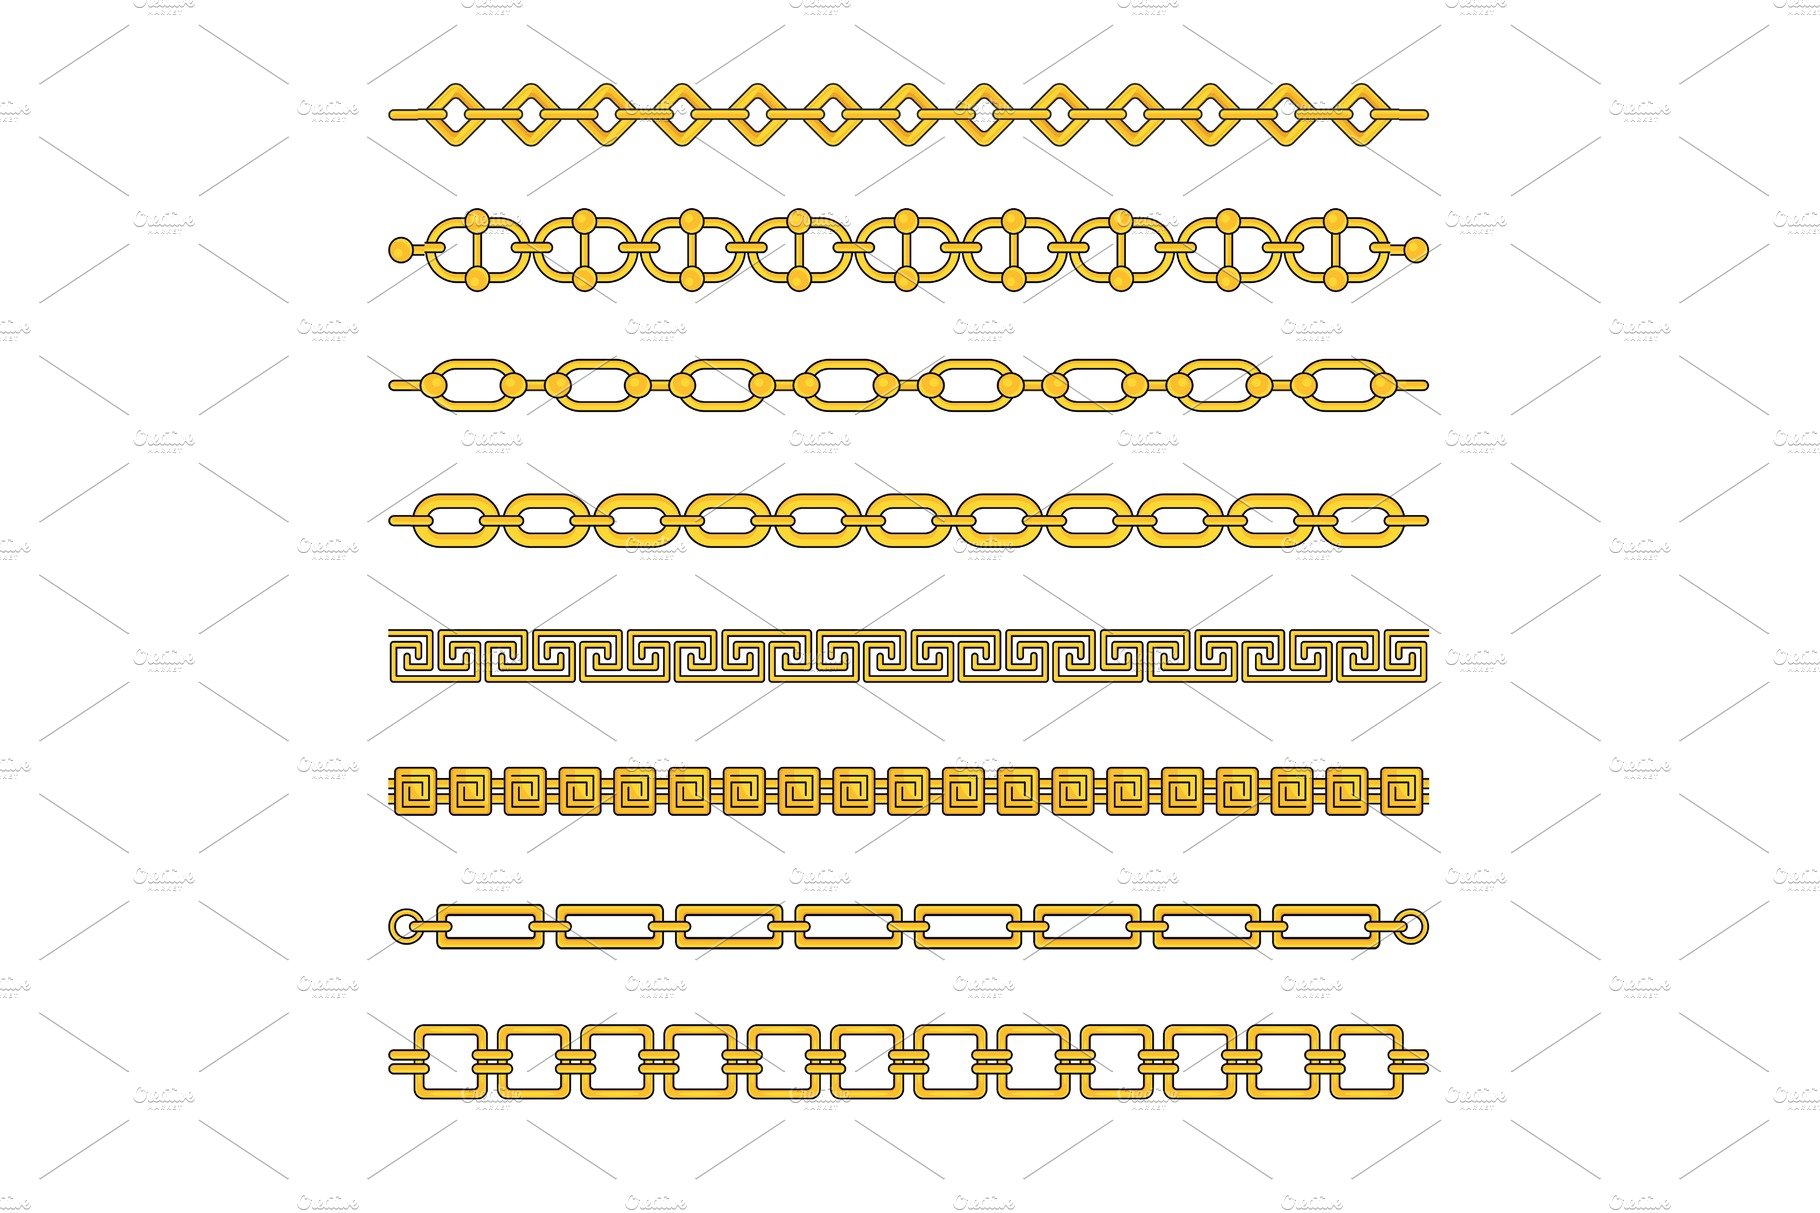 Gold chains with different weaving cover image.